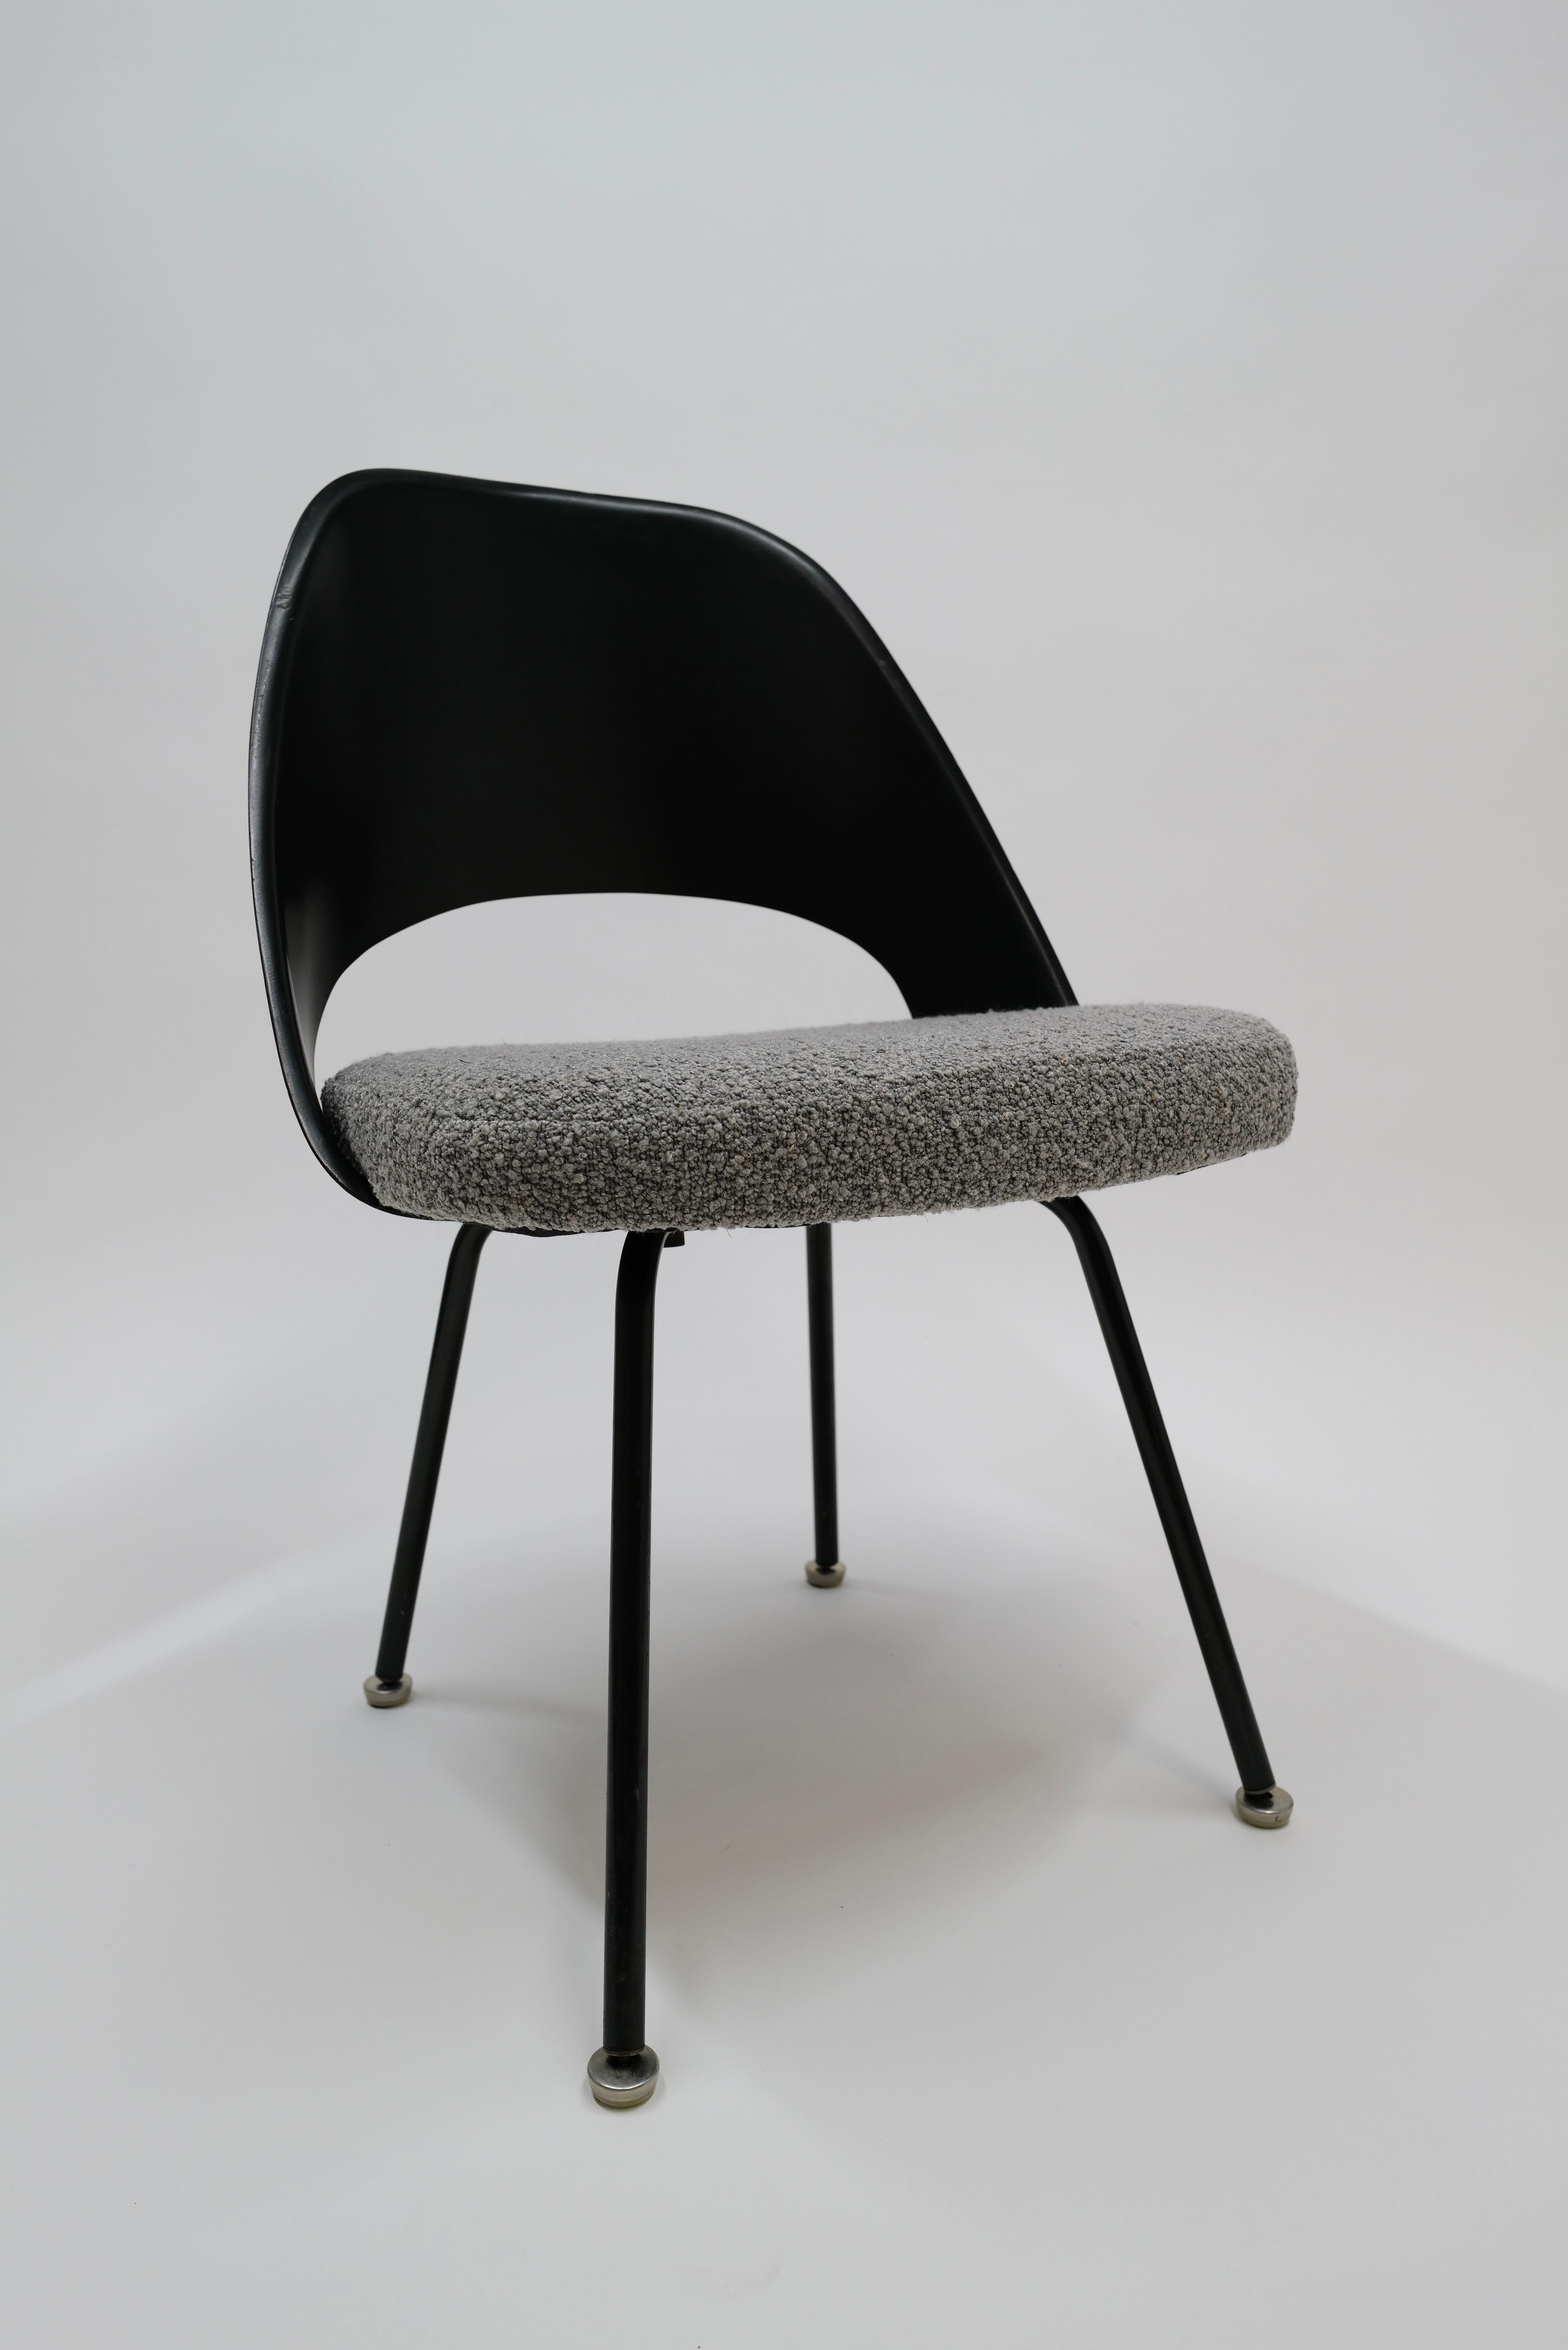 This vintage Knoll Associates executive side chair, designed by the renowned Eero Saarinen, features a distinctive fiberglass back that exudes mid-century modern charm. Reimagined with a sophisticated touch, it has been reupholstered in a delightful